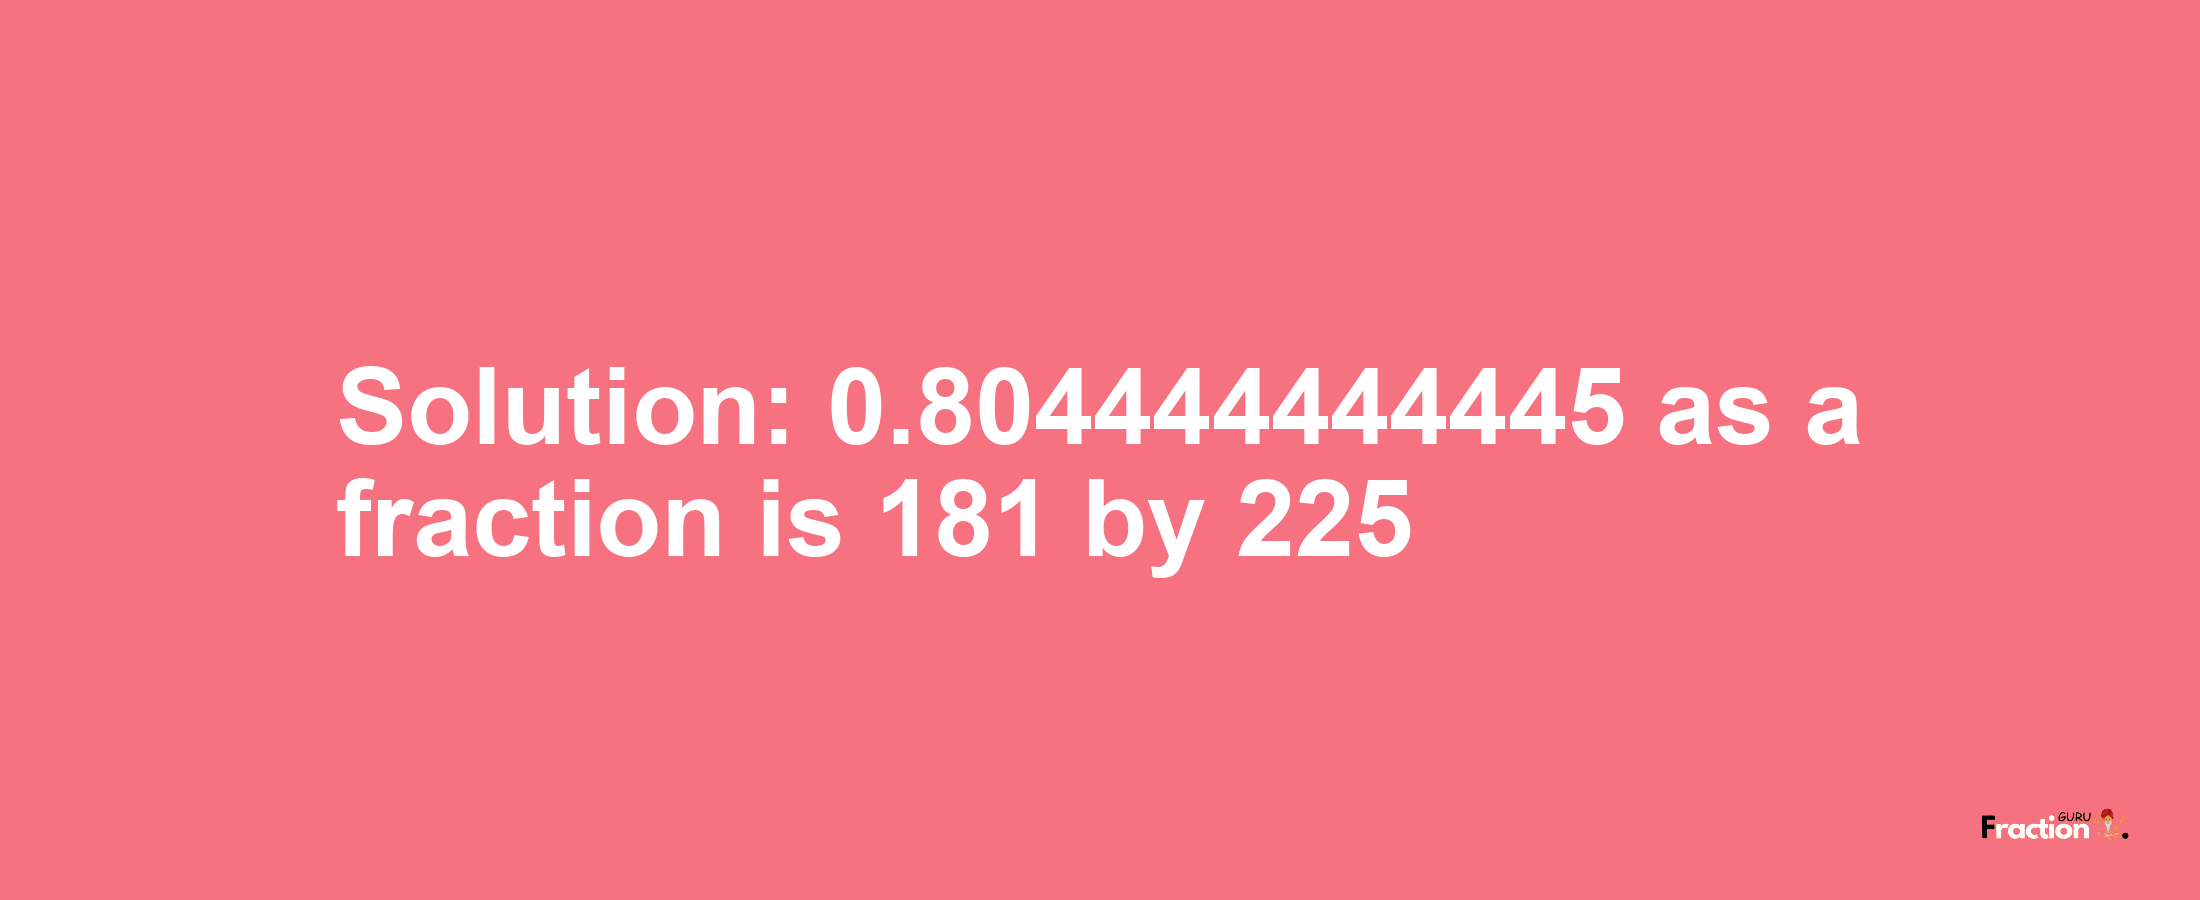 Solution:0.804444444445 as a fraction is 181/225